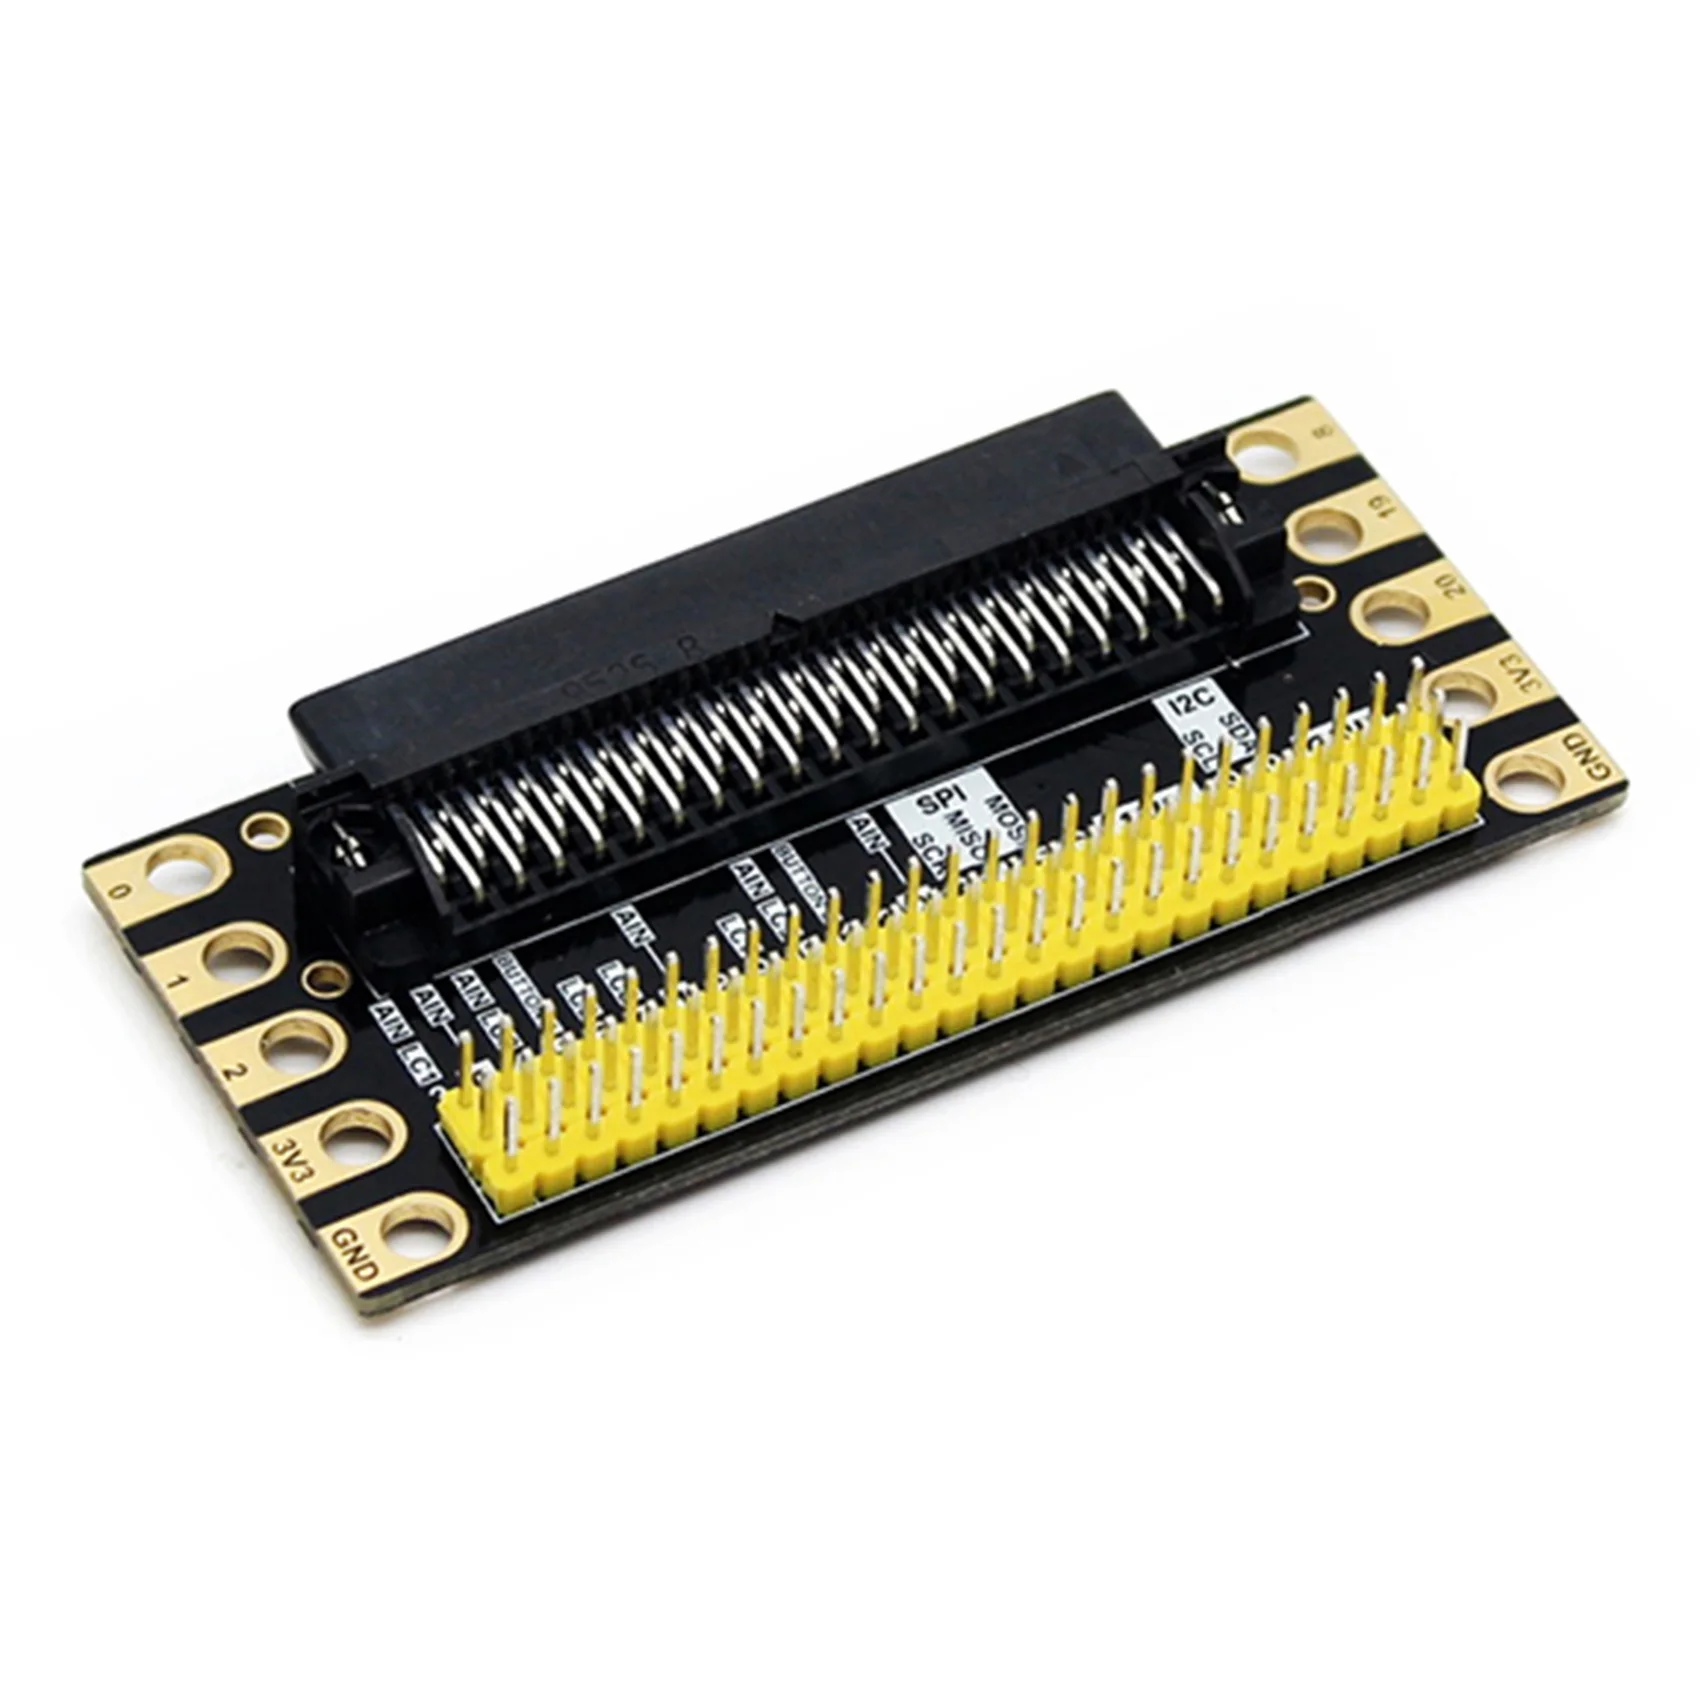 

Waveshare IO Expansion Board Edge Breakout for BBC MicroBit Micro:Bit V1.5 V2 Adapter Board I/O Expansion Breakout Module